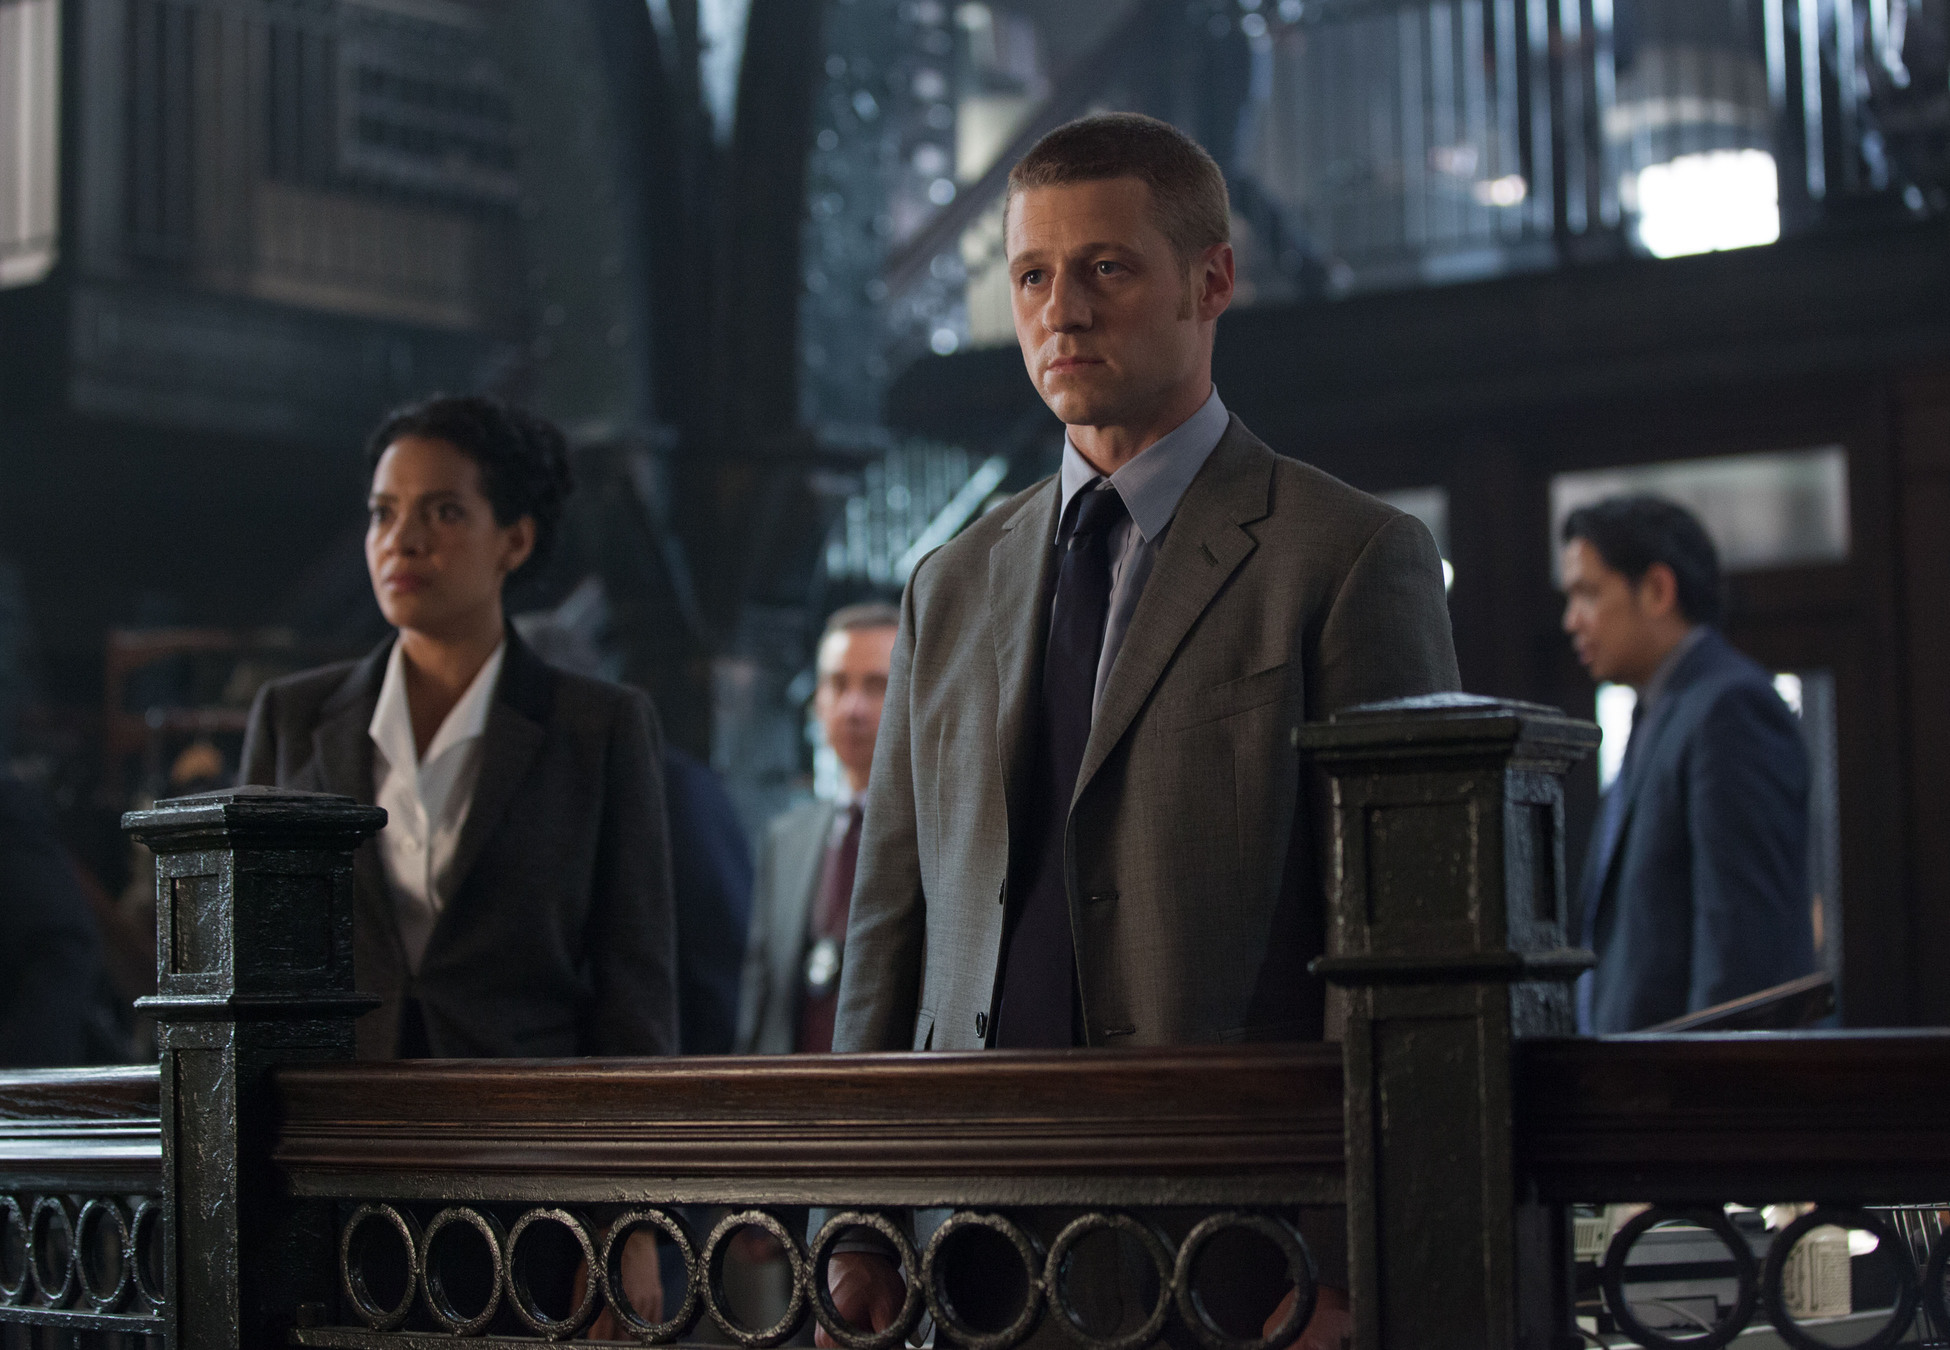 GOTHAM: An unwelcome visitor searches for Detective James Gordon (Ben McKenzie, R) at the GCPD in the "Penguin's Umbrella" episode of GOTHAM airing Monday, Nov. 3 (8:00-9:00 PM ET/PT) on FOX. Also pictured: Zabryna Guevara. Â©2014 Fox Broadcasting Co. Cr: Jessica Miglio/FOX